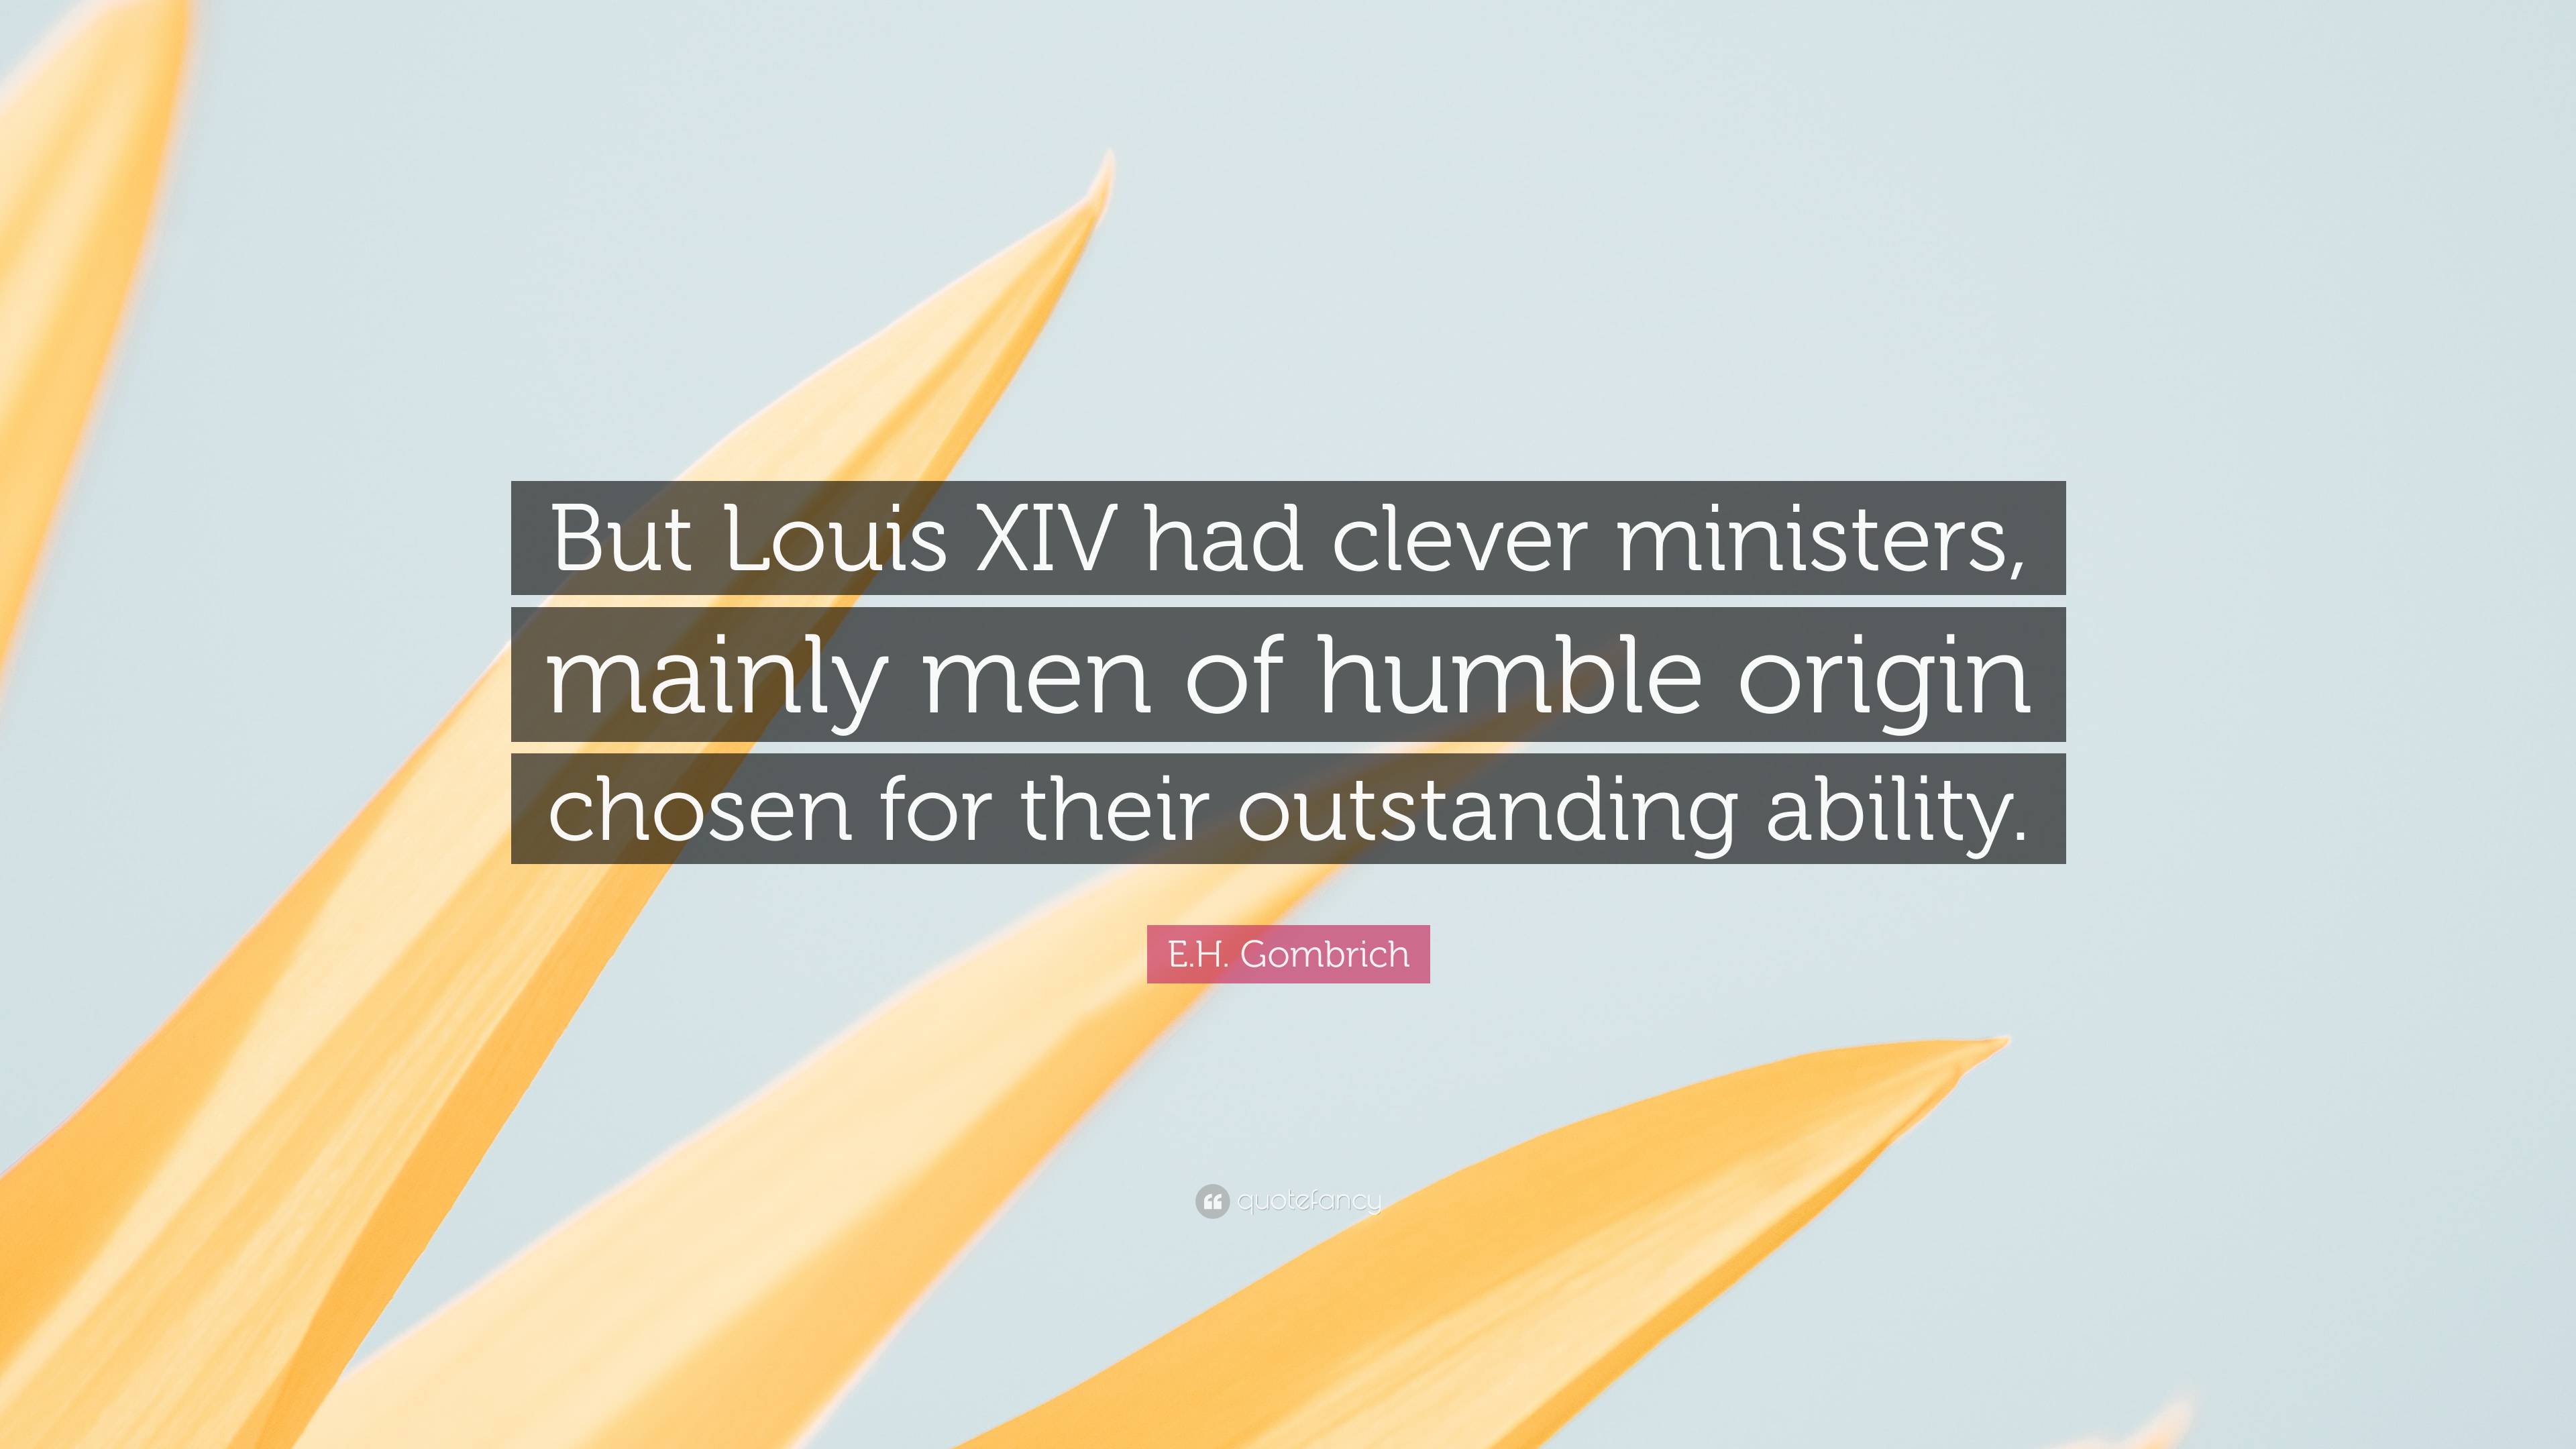 E.H. Gombrich Quote: “But Louis XIV had clever ministers, mainly men of ...